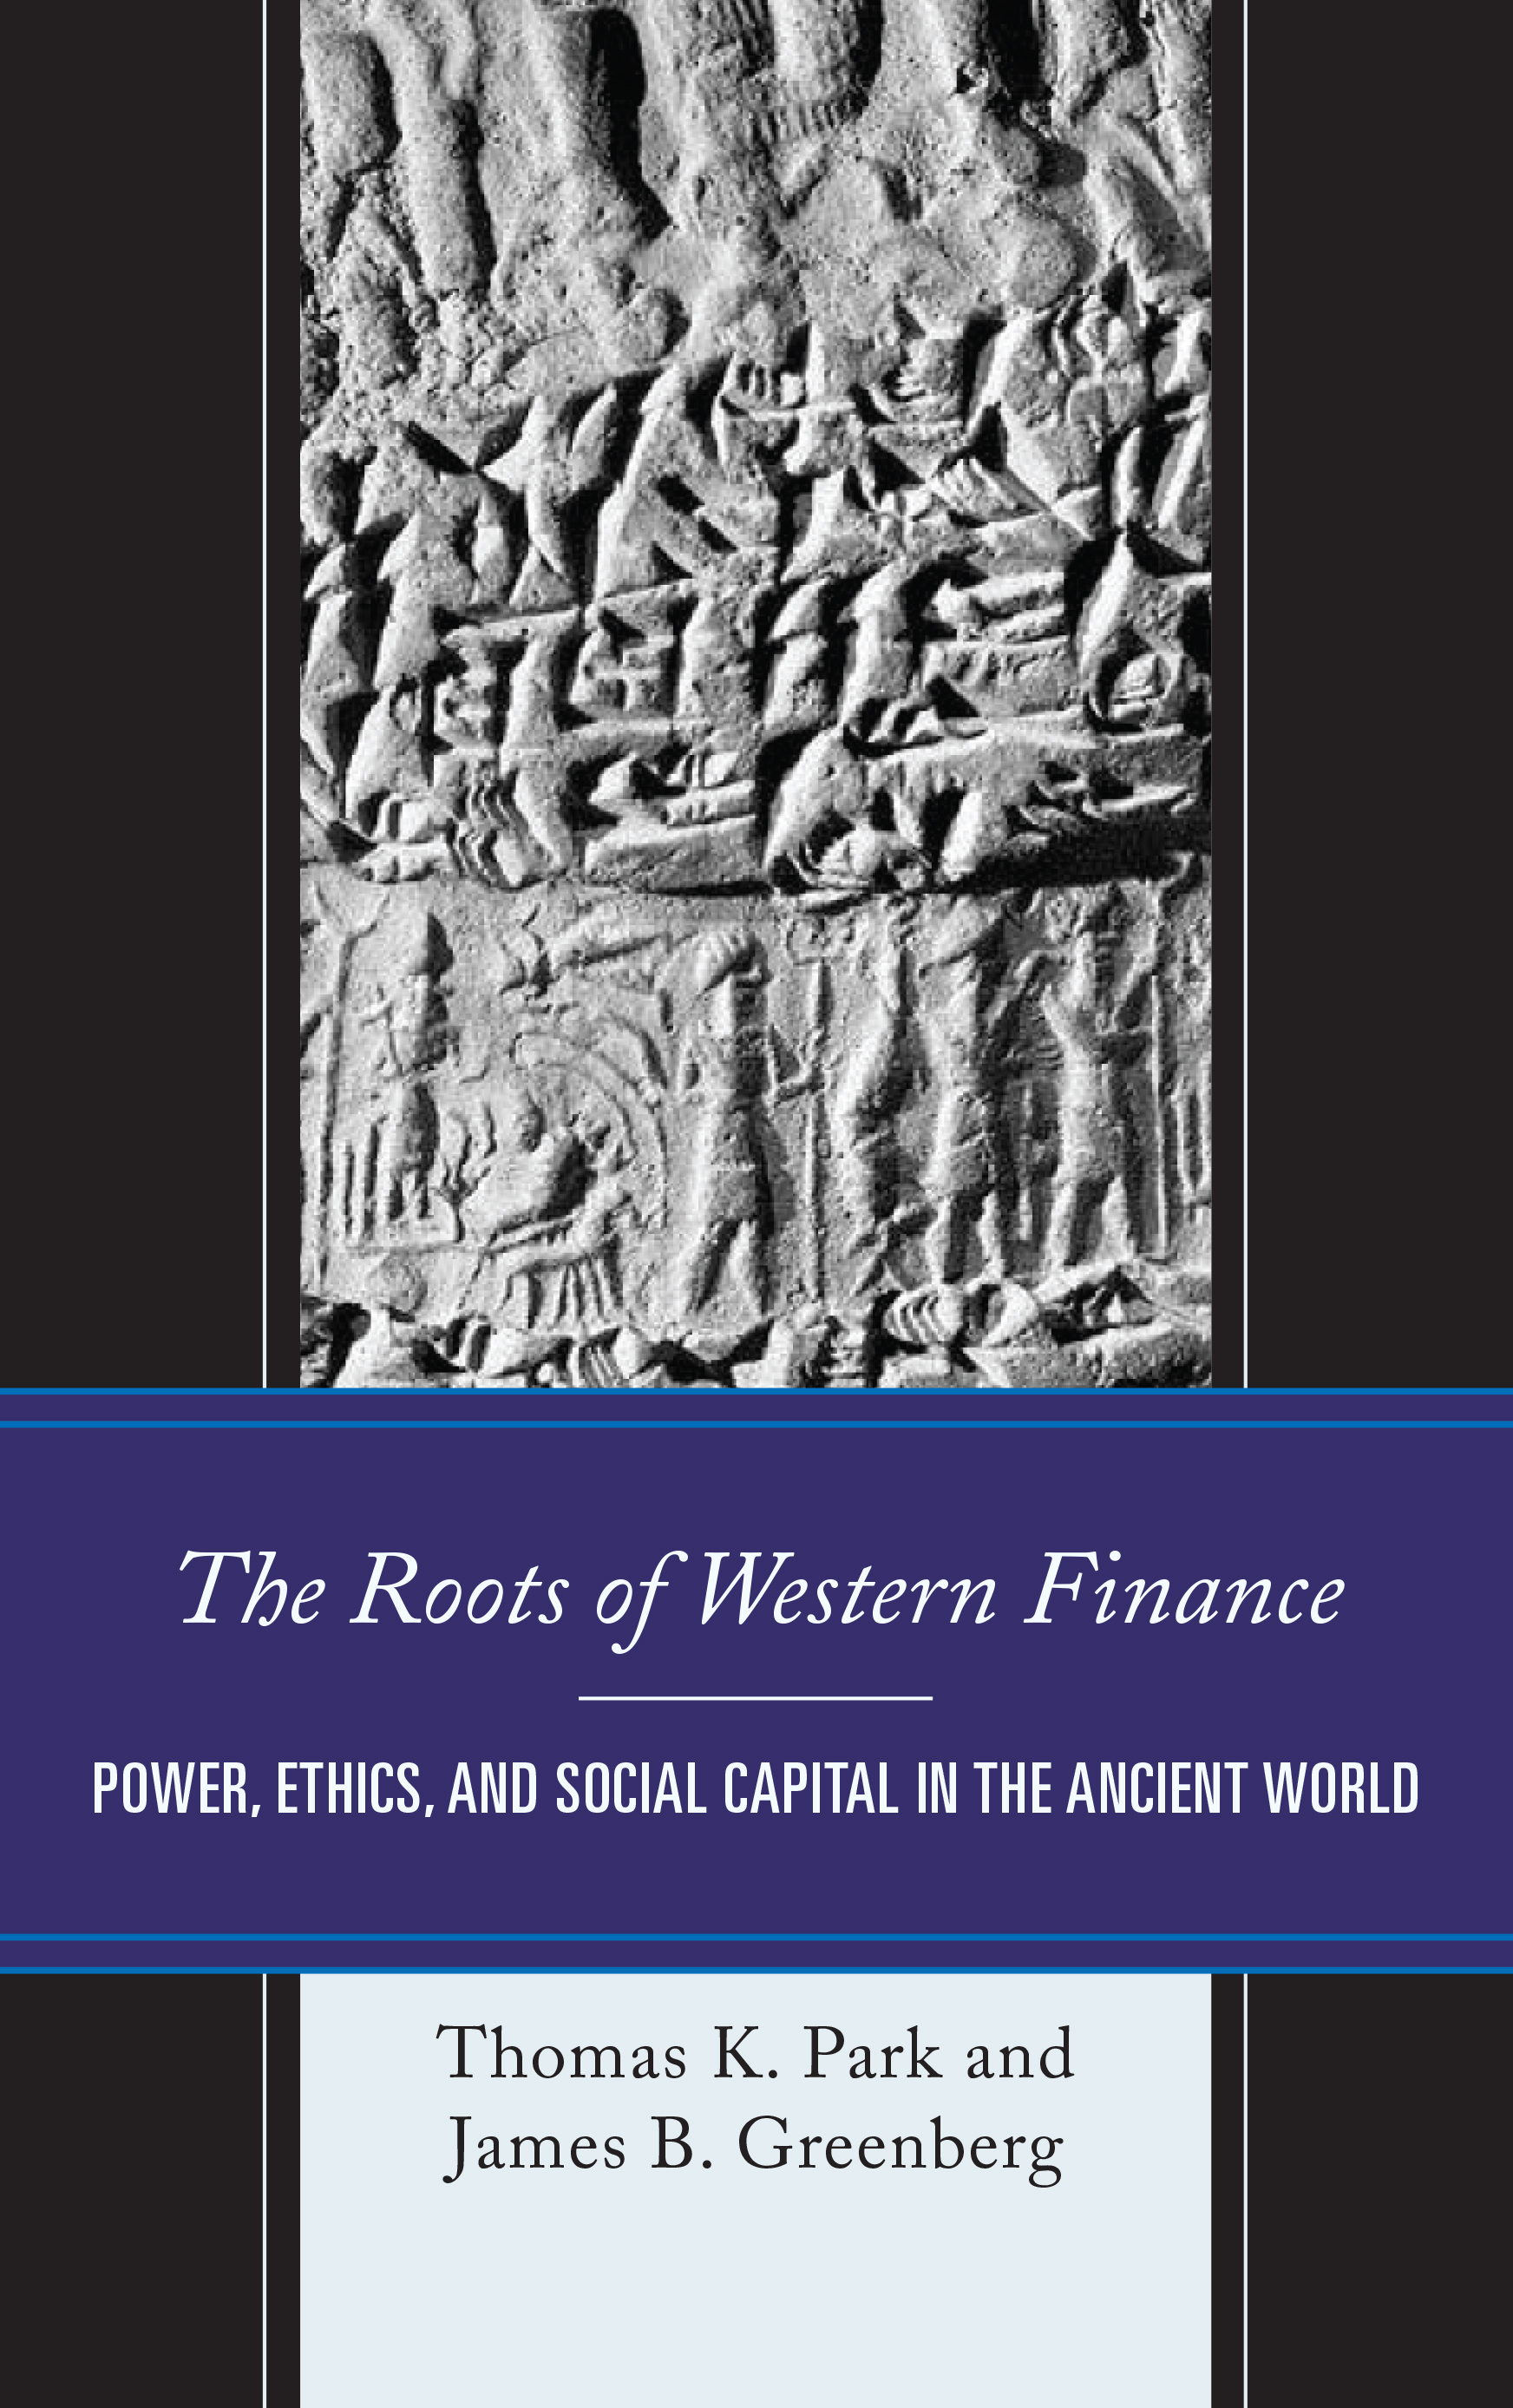 The Roots of Western Finance: Power, Ethics, and Social Capital in the Ancient World